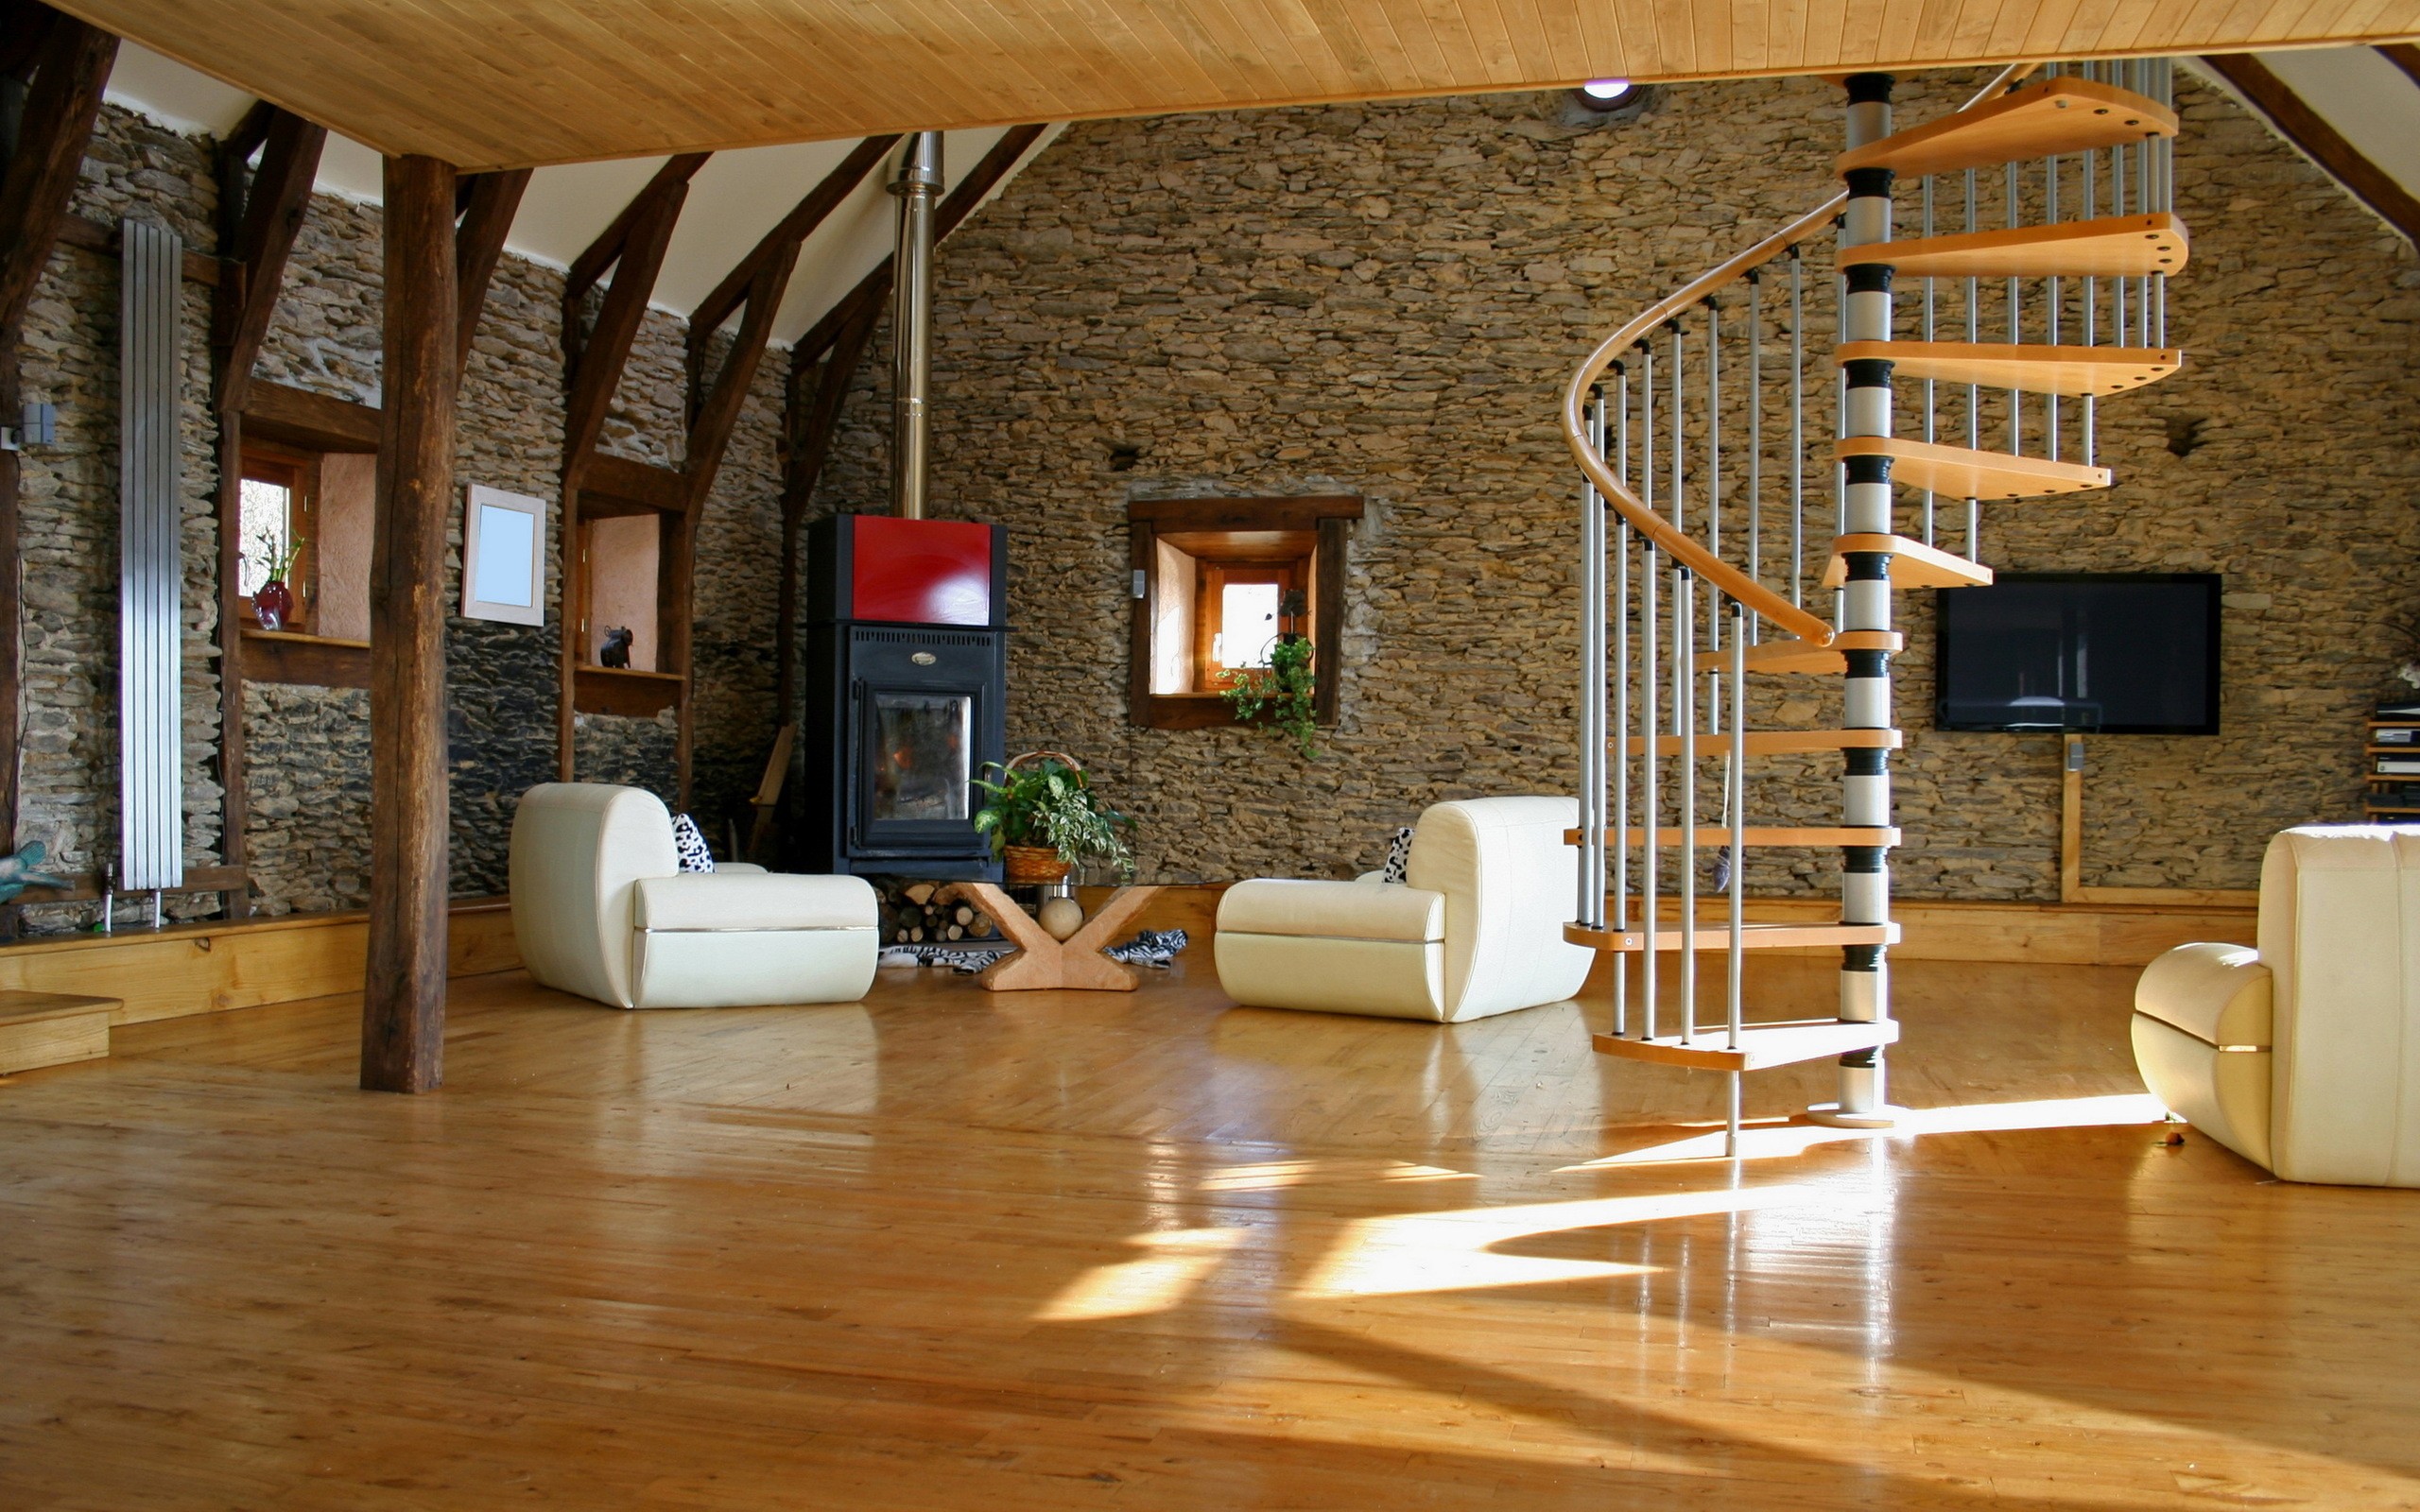 General 2560x1600 stairs interior design wooden surface indoors